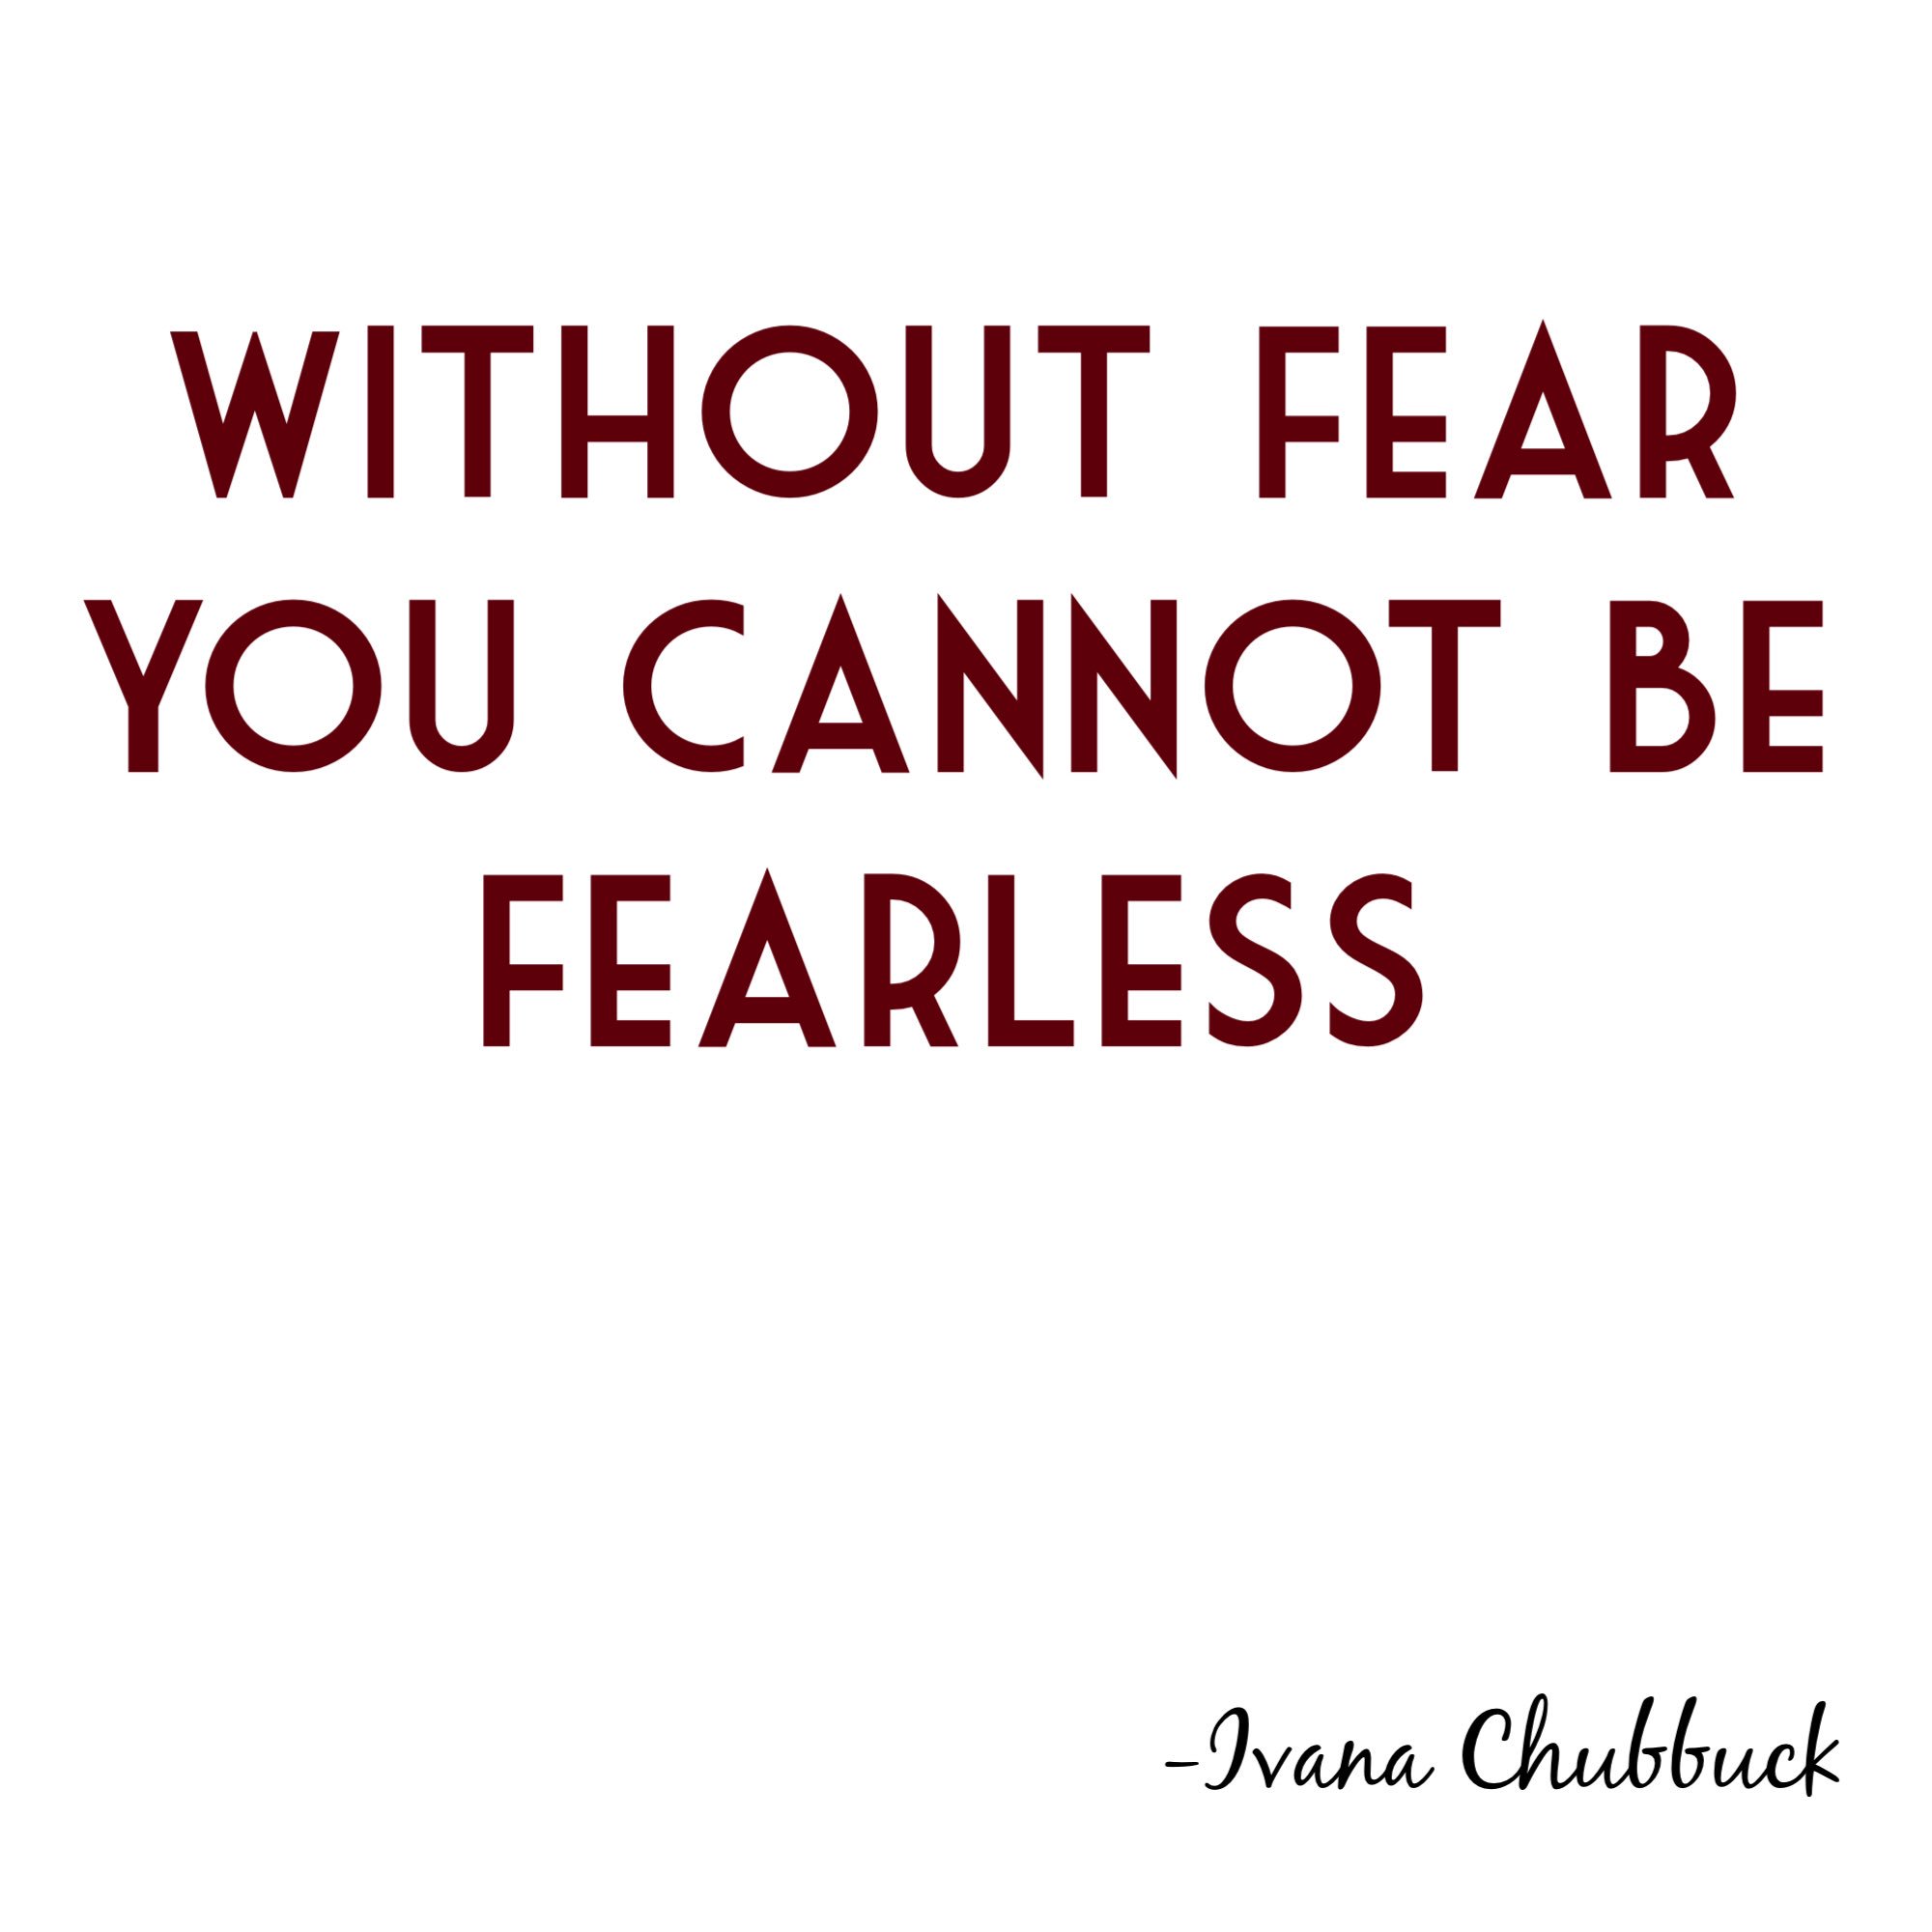 Ivana Chubbuck on X: Without fear, you cannot be fearless